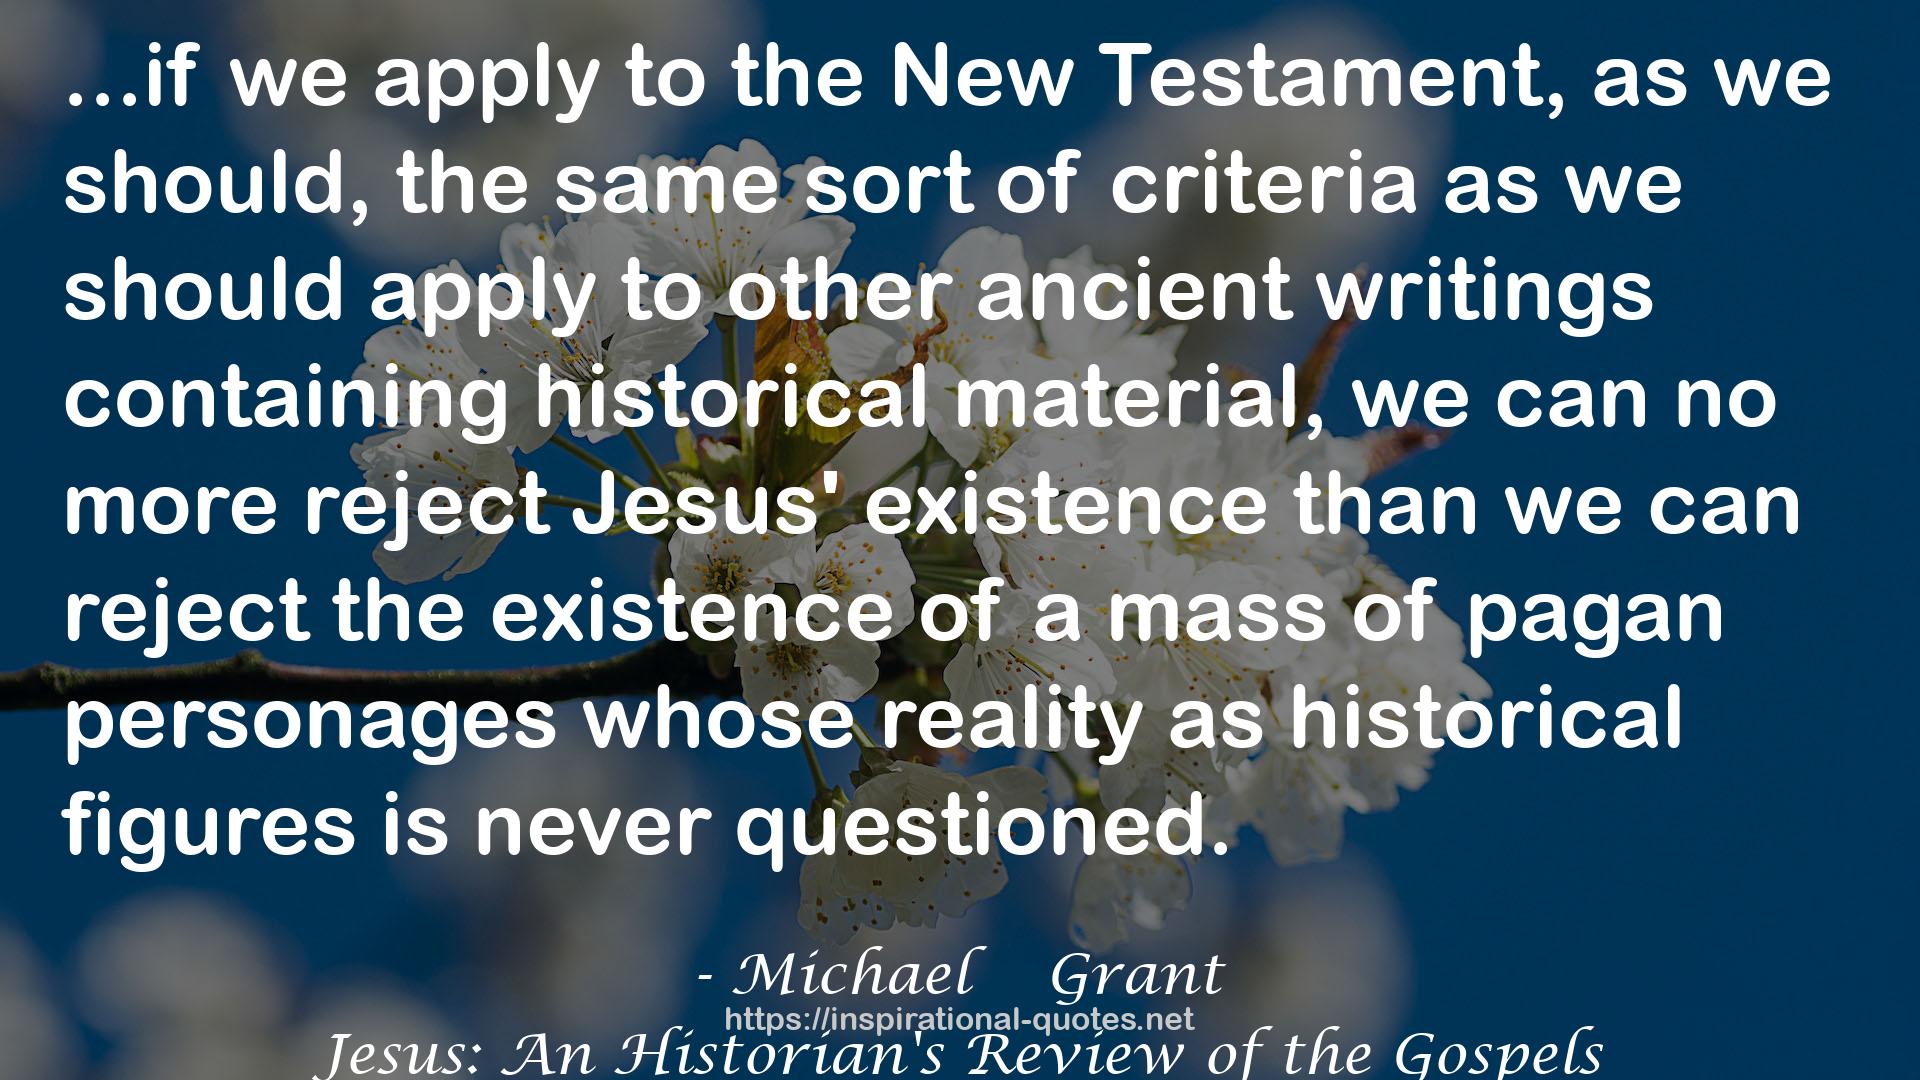 Jesus: An Historian's Review of the Gospels QUOTES